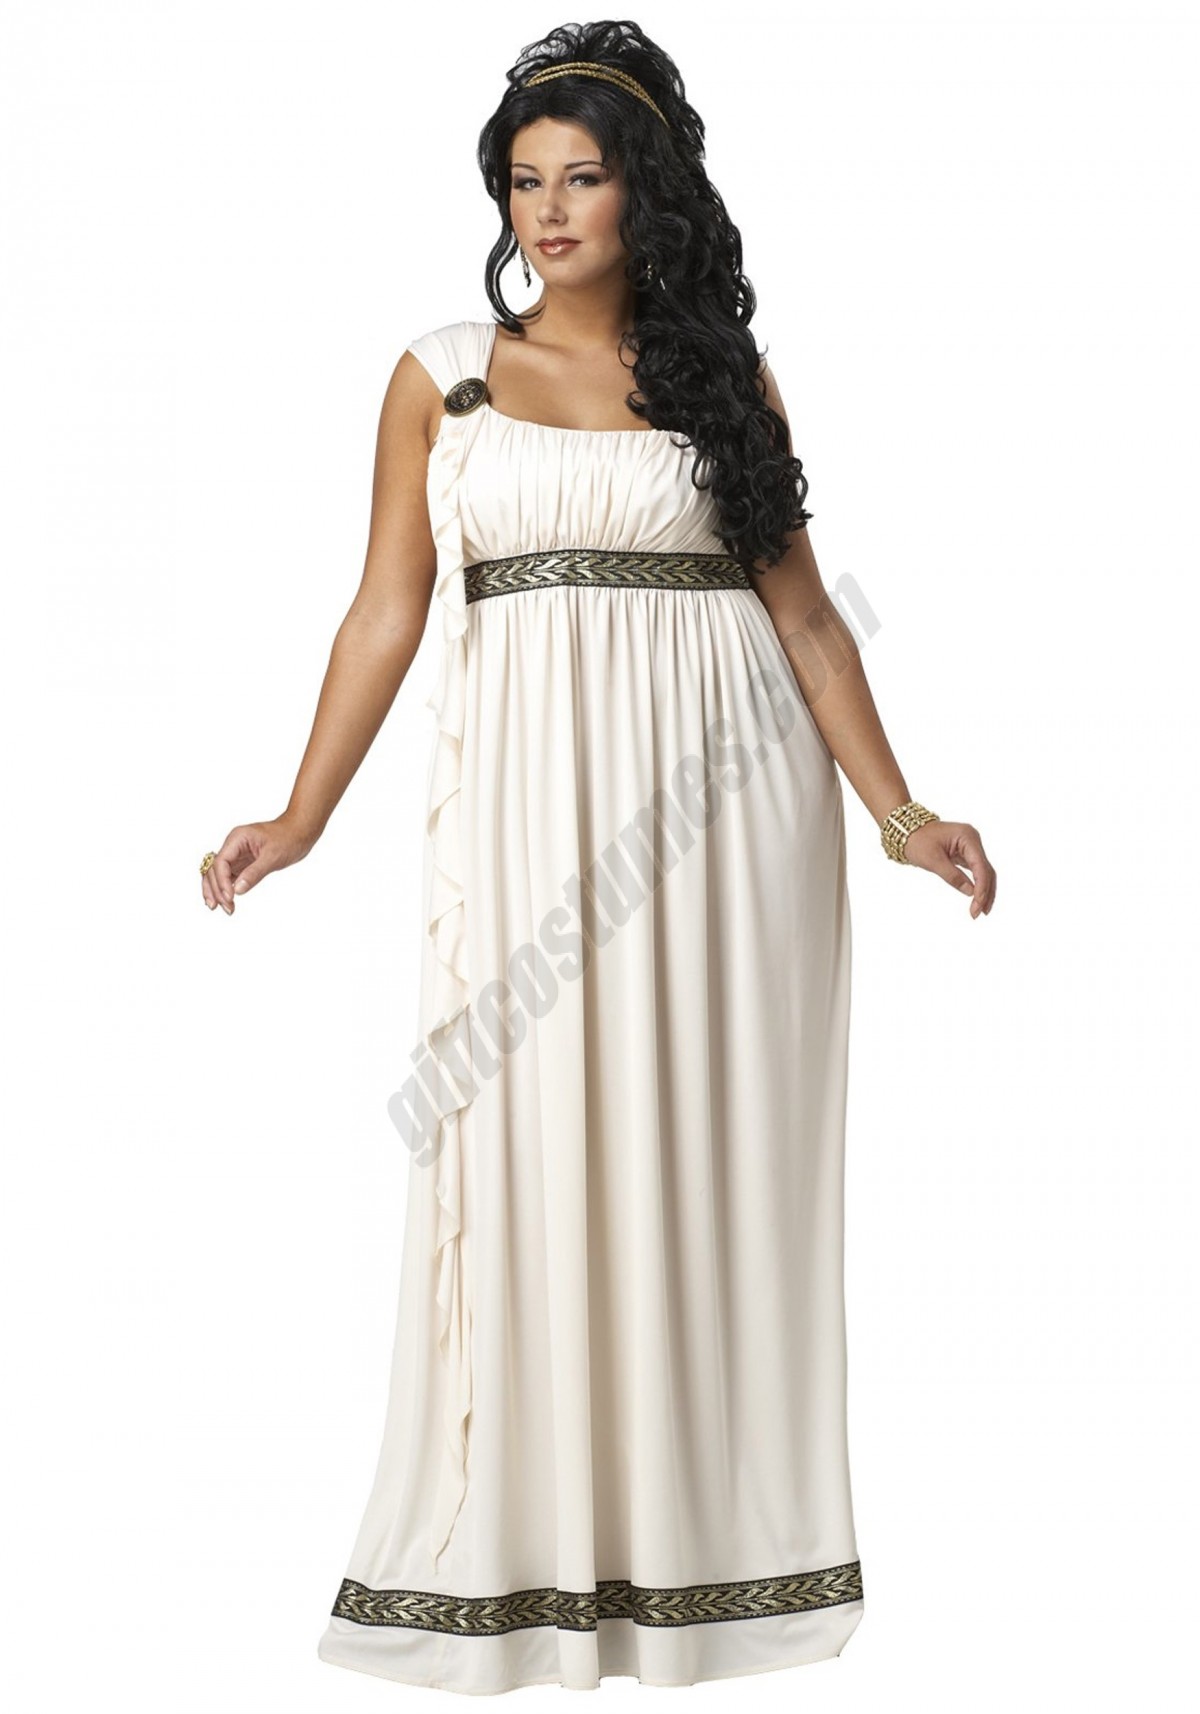 Plus Size Olympic Goddess Costume Promotions - -0